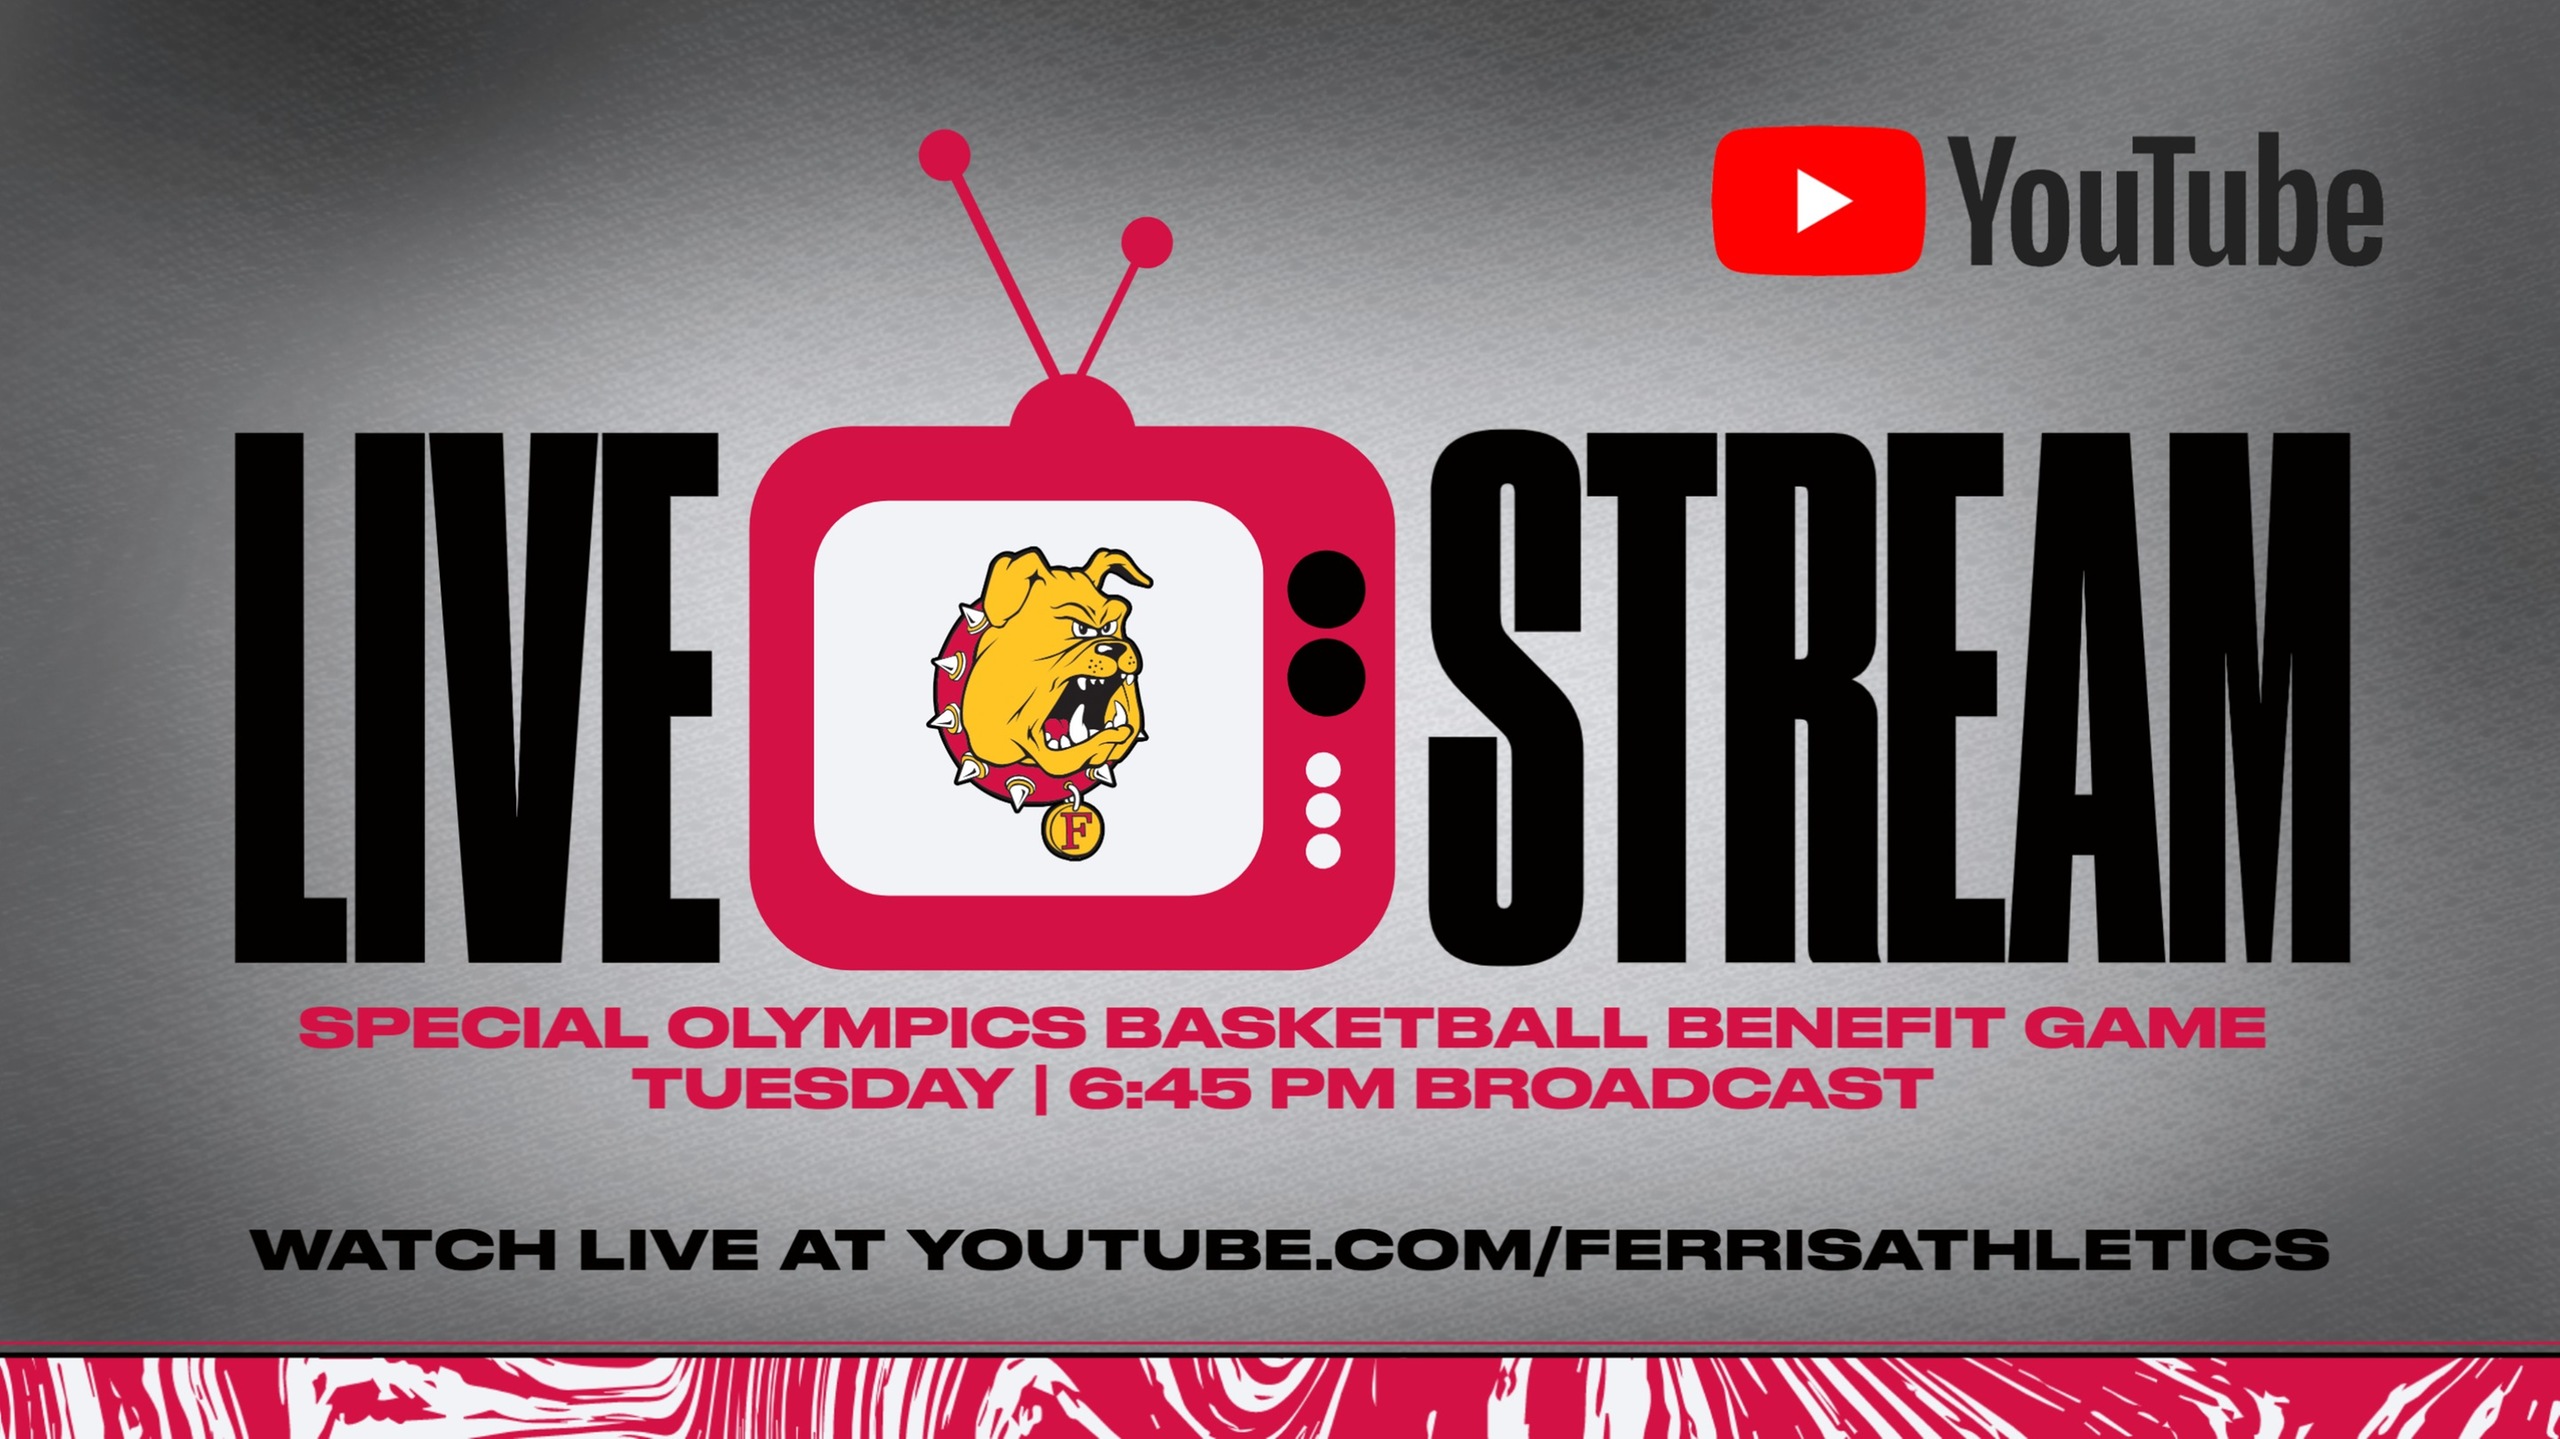 Watch The Live Stream Of Special Olympics Basketball Game On Tuesday Night!